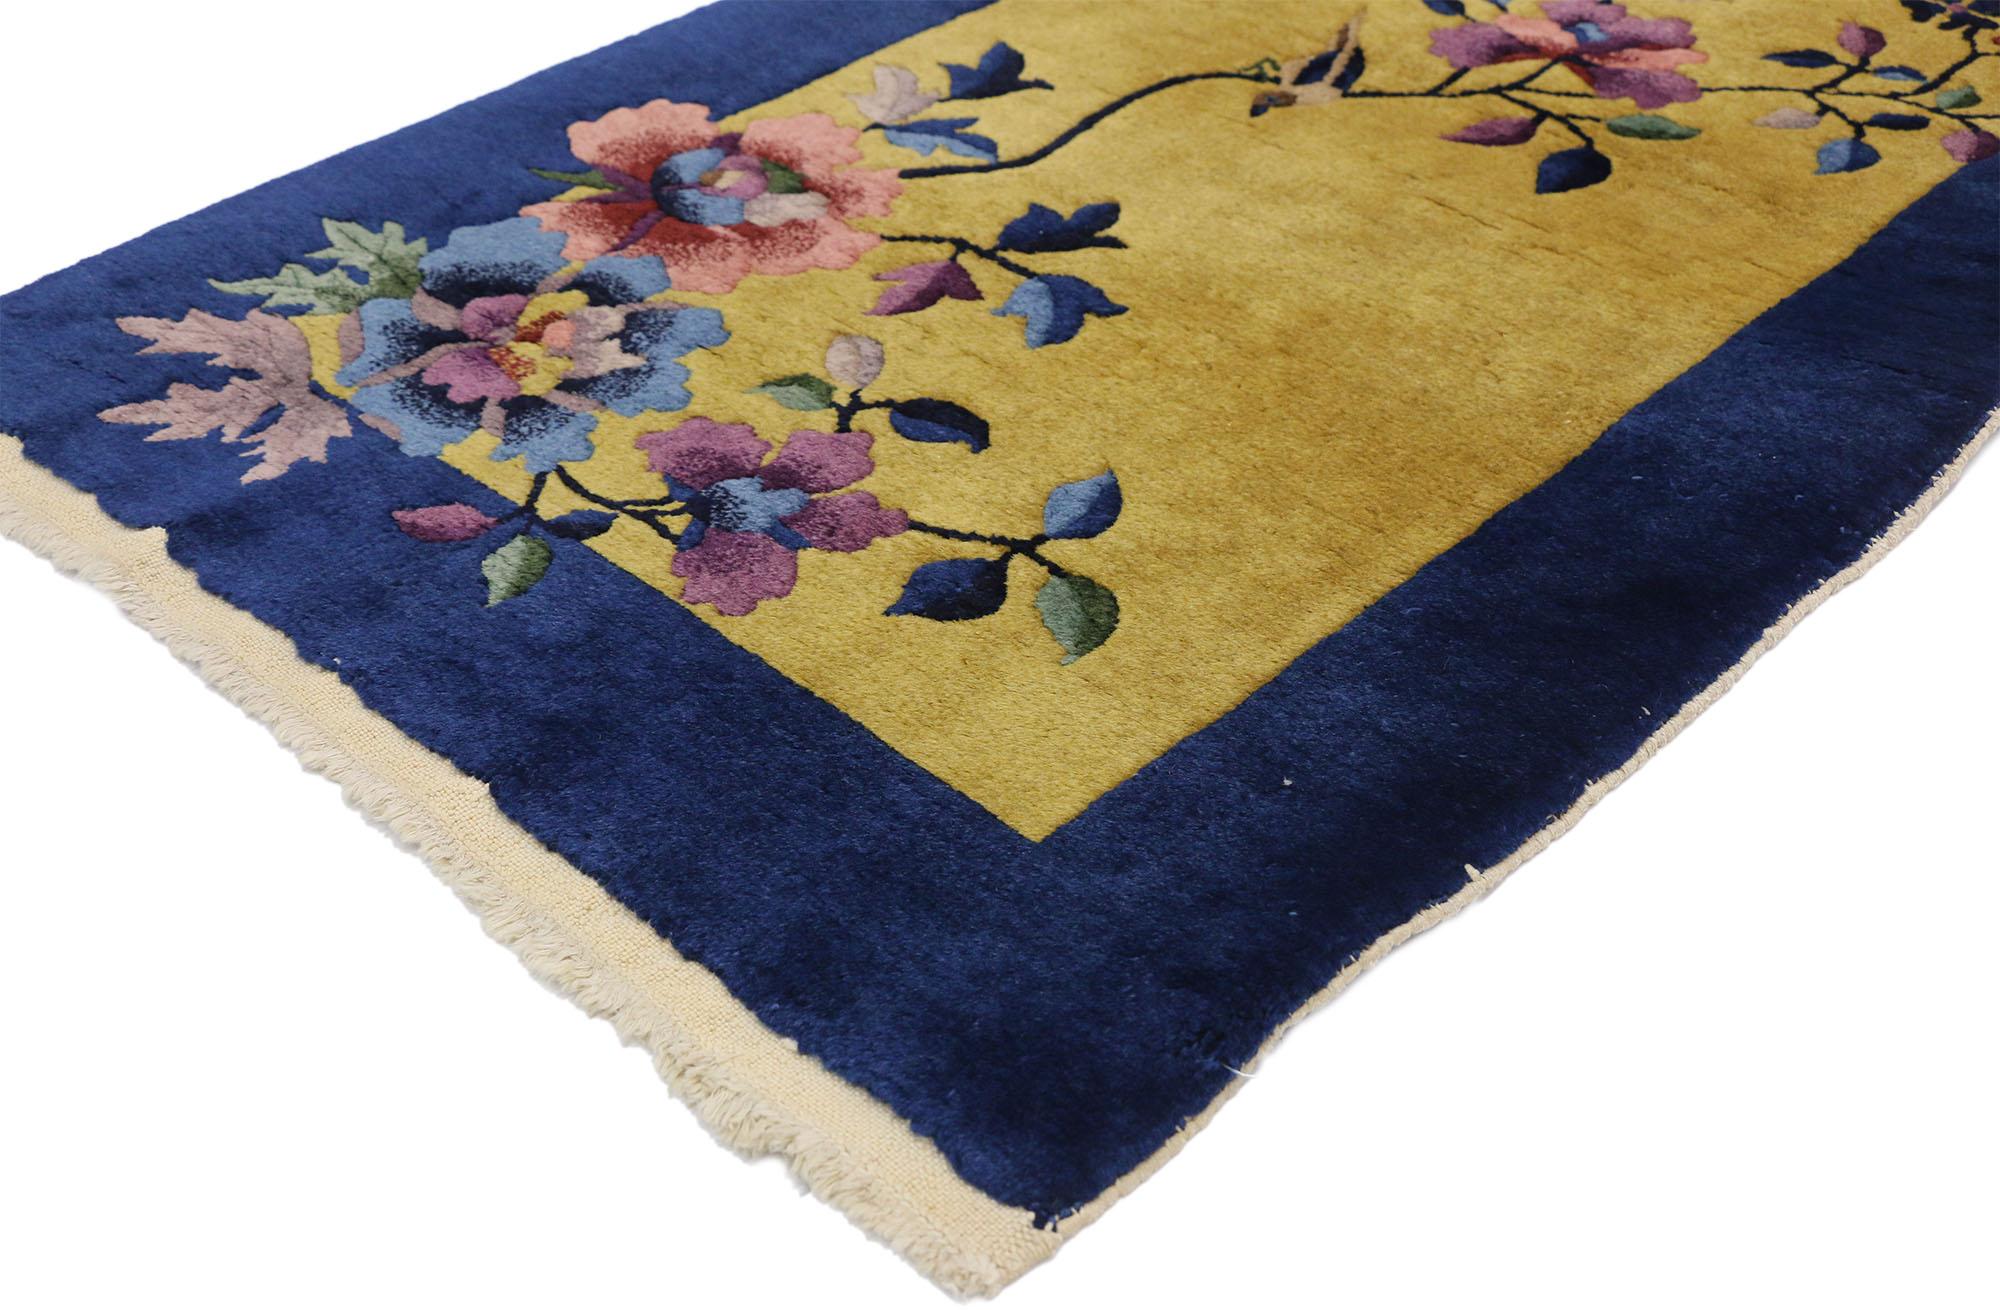 71863, Antique Chinese Art Deco Style Rug Inspired by Walter Nichols. Revitalize your space with this early 20th century antique Chinese Art Deco rug, inspired by Walter Nichols. A striking mix of asymmetrical flowers, a butterfly with a magpie bird